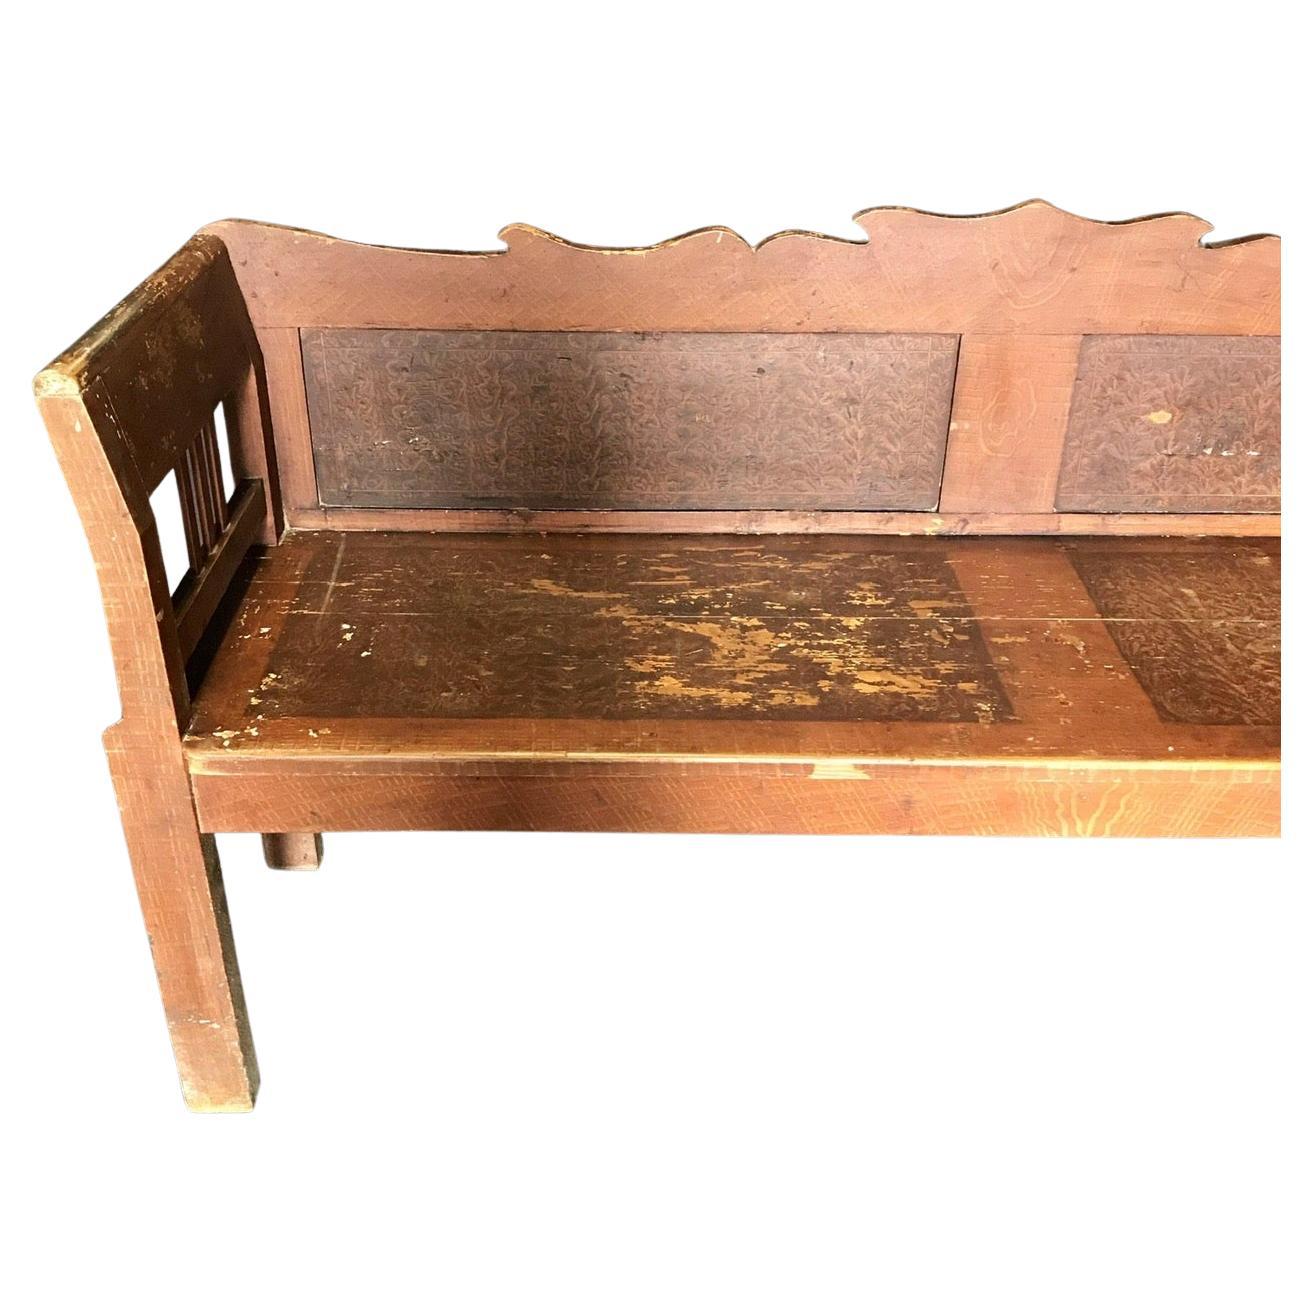 Antique European faux painted sofa bench with pretty shaped top and wonderful worn patina that can easily grace an entry hallway. Gorgeous faux paint can be accented with pillows or enjoyed as is.
#656